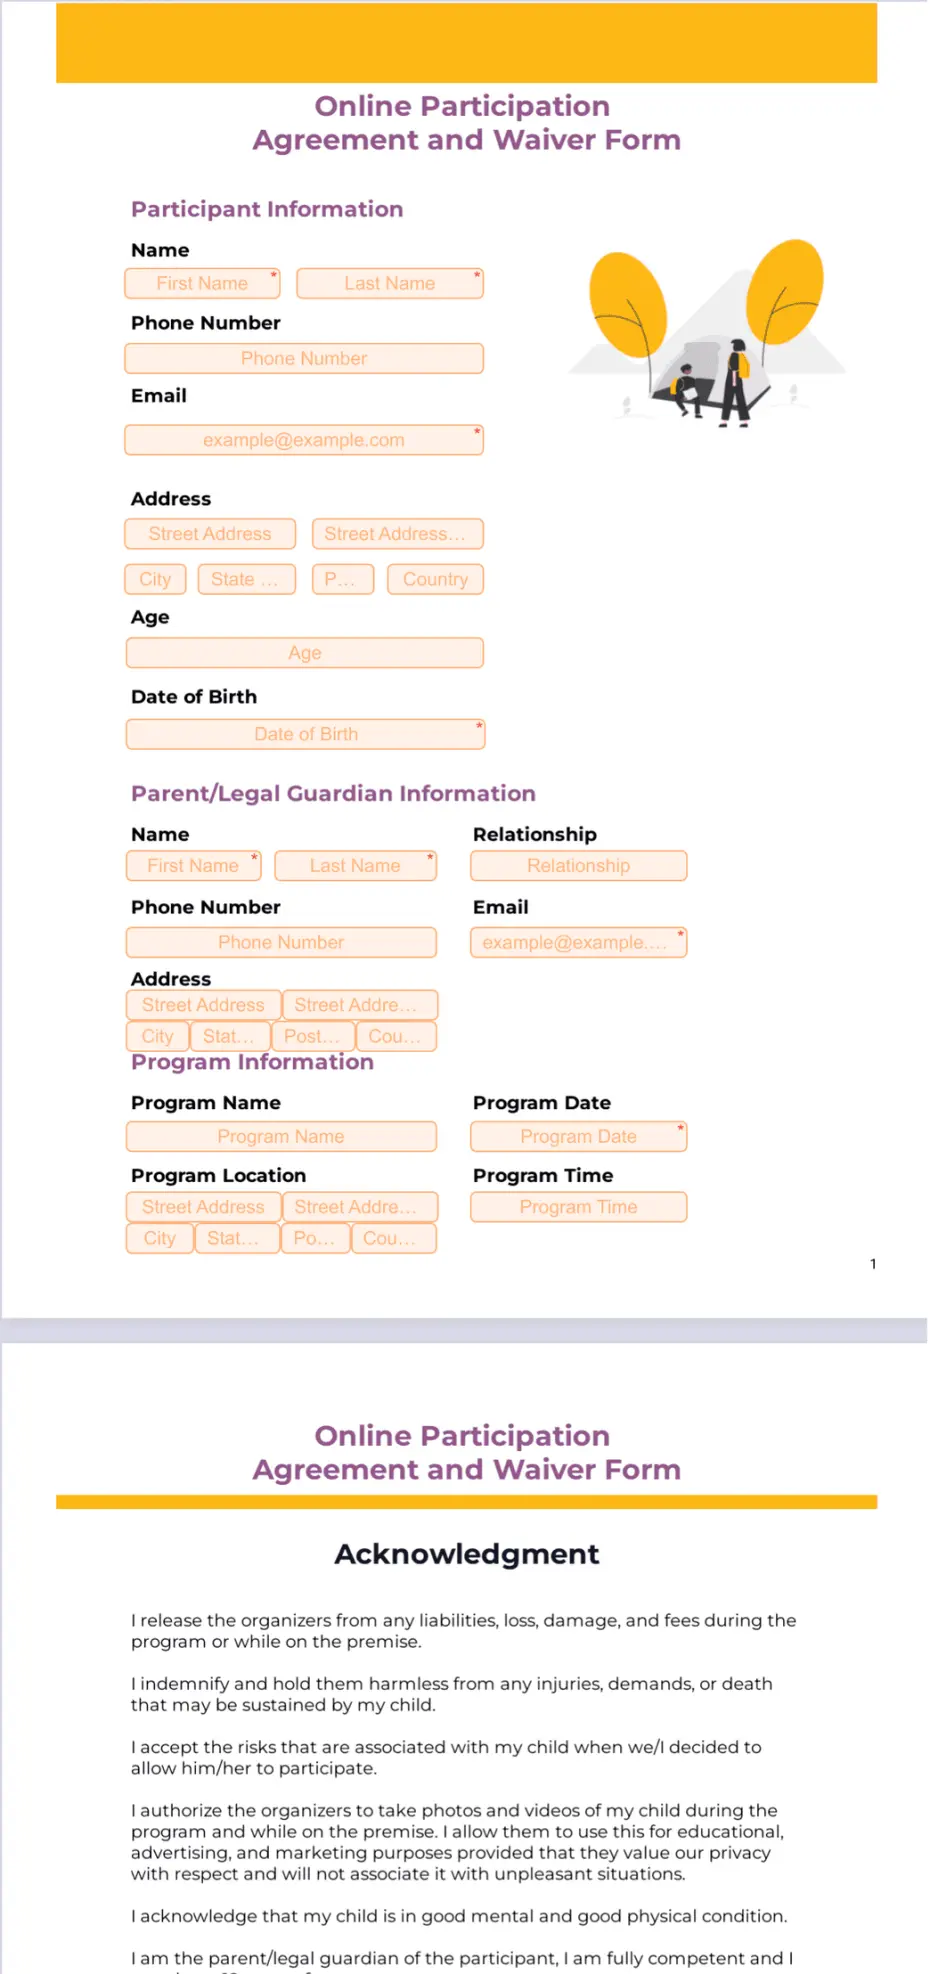 Online Participation Agreement and Waiver Form